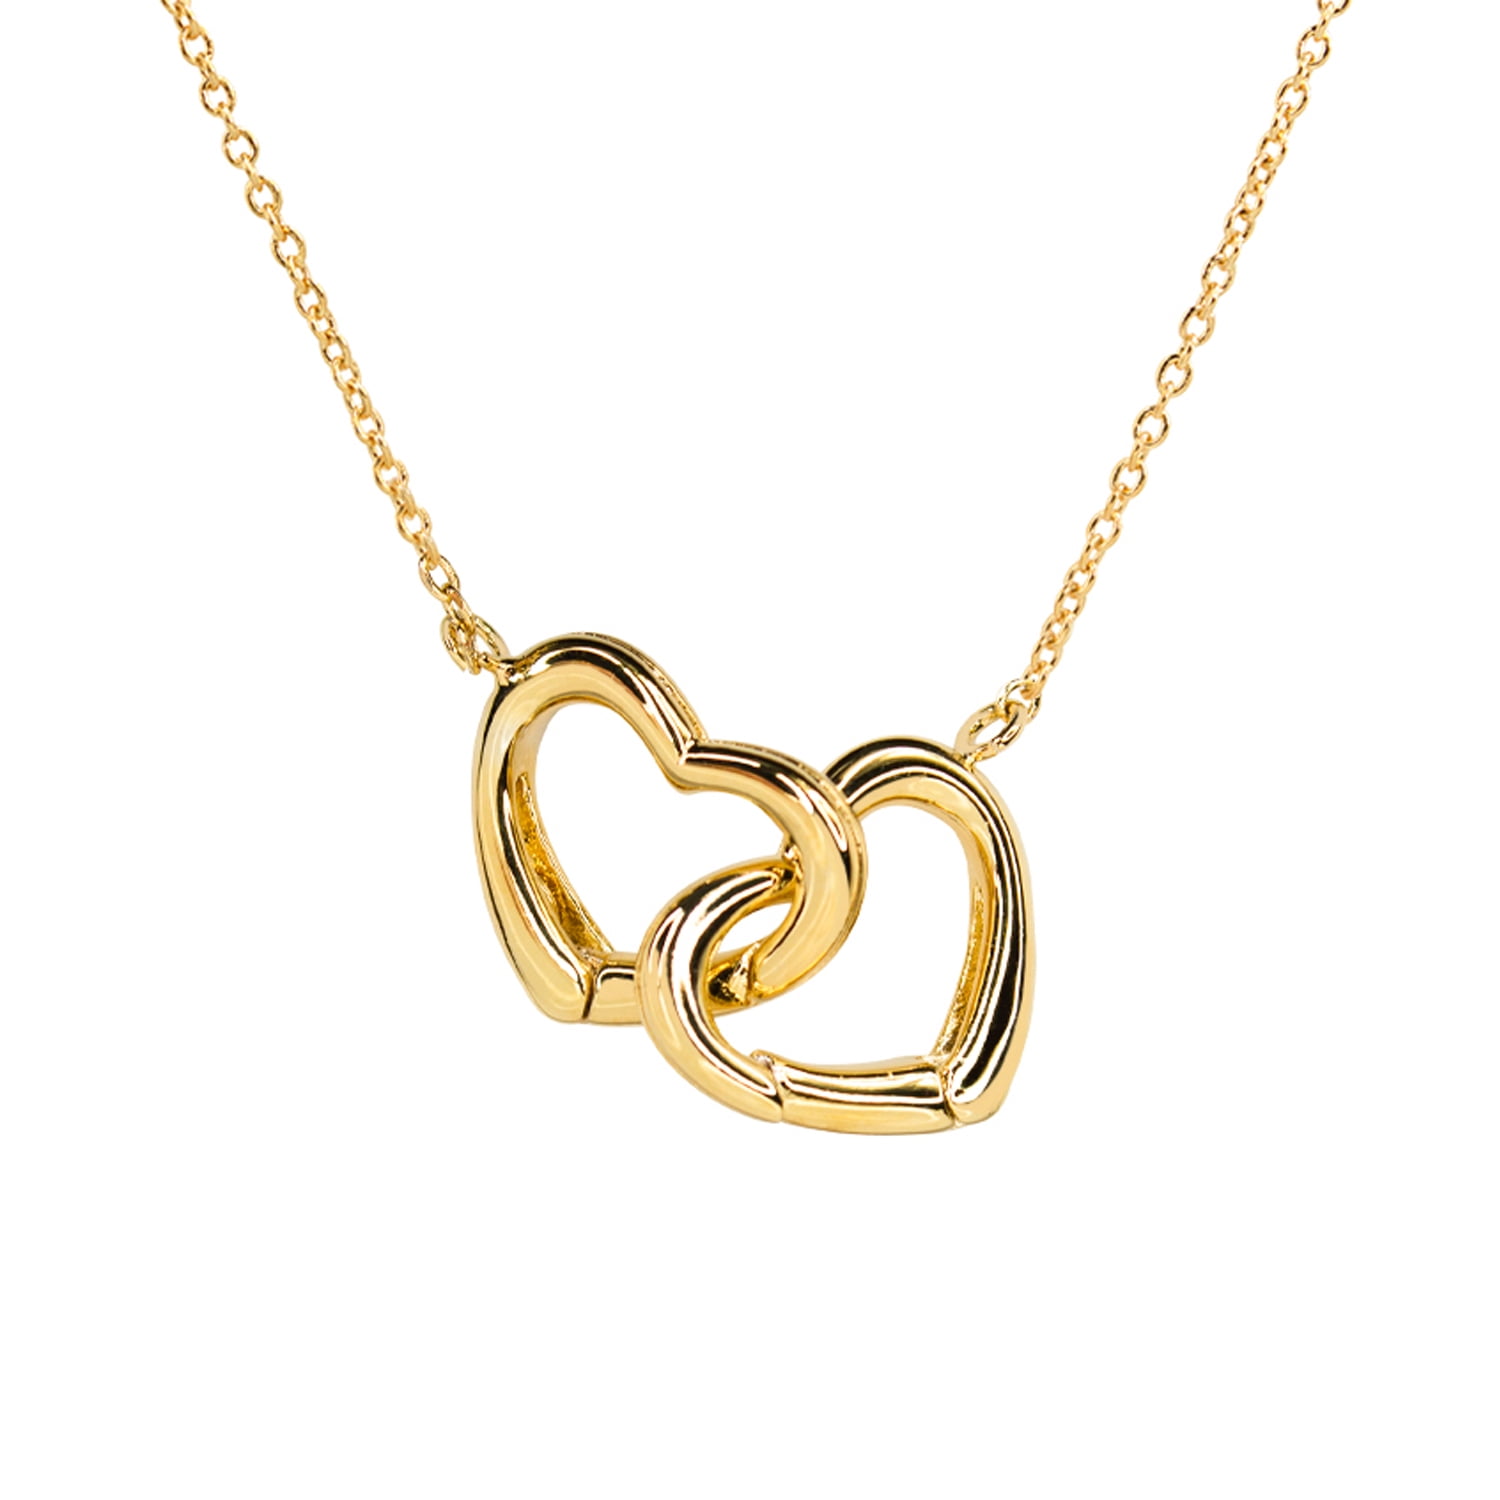 Gold double heart necklace with Initial and Date - Lulu + Belle Jewellery